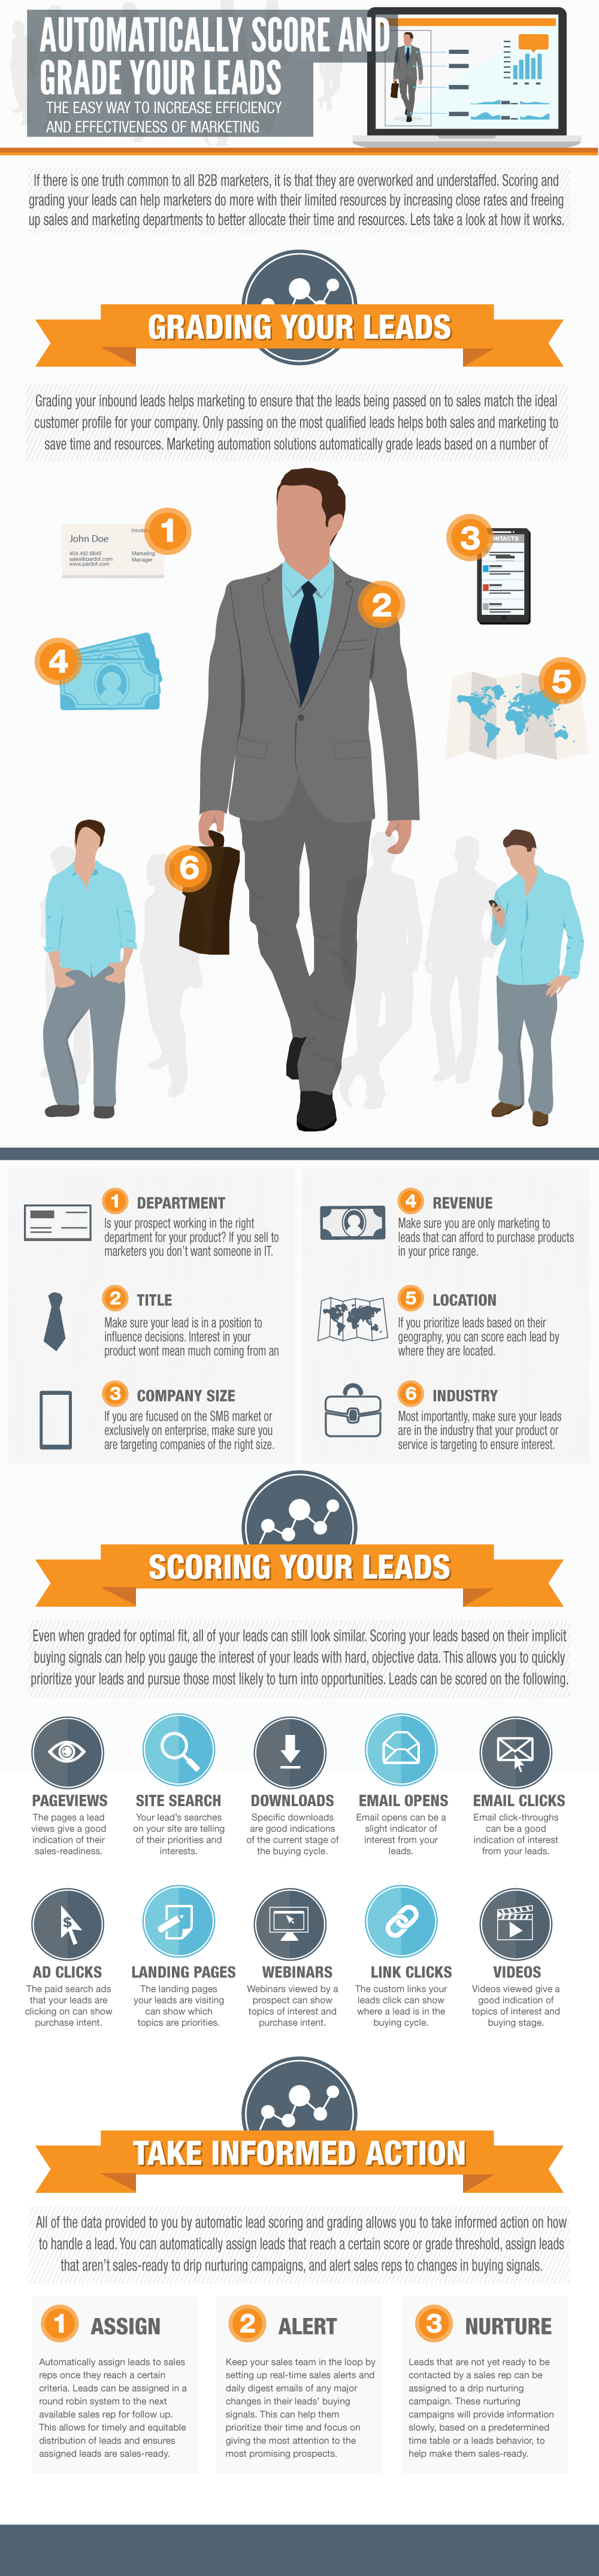 the process of triaging leads can be an immensly time consuming one for marketing departments and passing on the wrong leads to sales can waste your sales reps’ time and strain the sales and marketing relationship. We’ve put together the following infographic